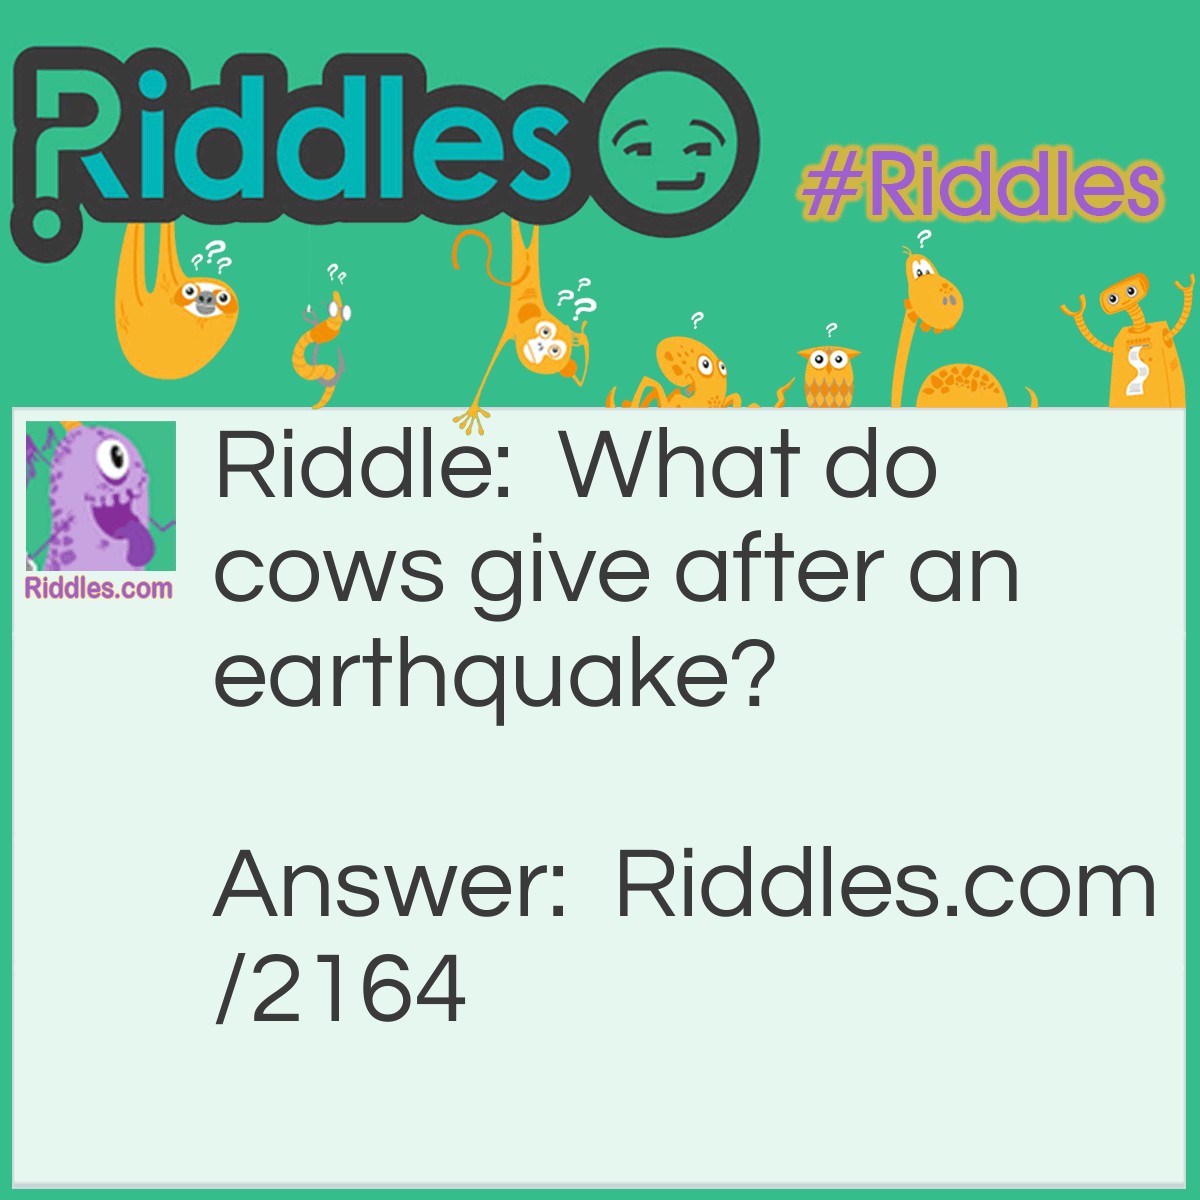 Riddle: What do cows give after an earthquake? Answer: Milk shakes.